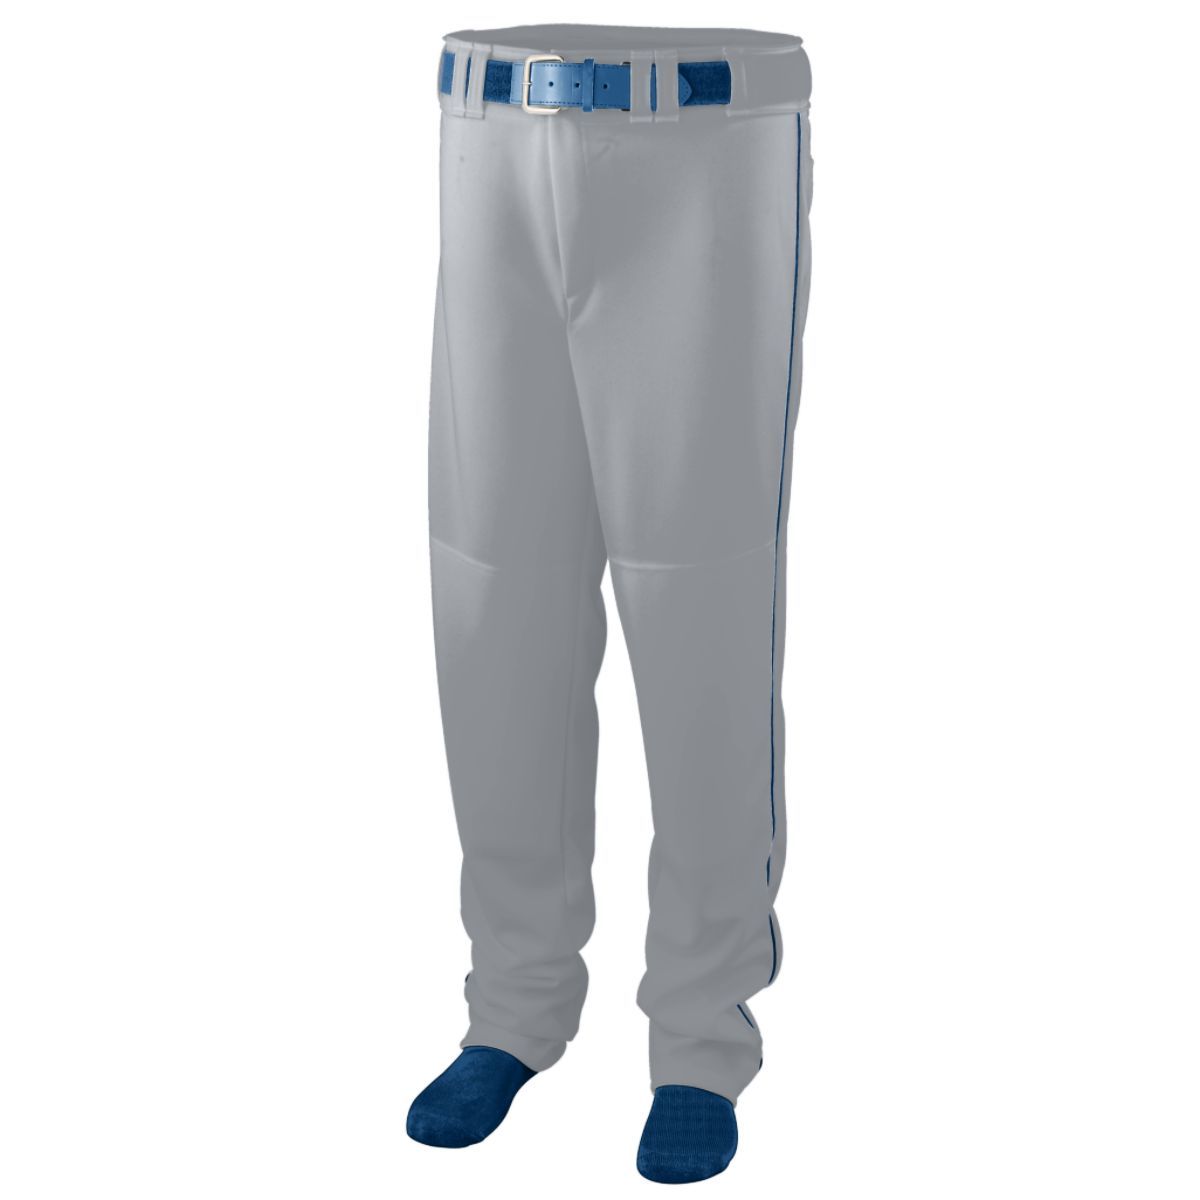 Augusta Sportswear Series Baseball/Softball Pant With Piping in Silver Grey/Navy  -Part of the Adult, Adult-Pants, Pants, Augusta-Products, Baseball, All-Sports, All-Sports-1 product lines at KanaleyCreations.com